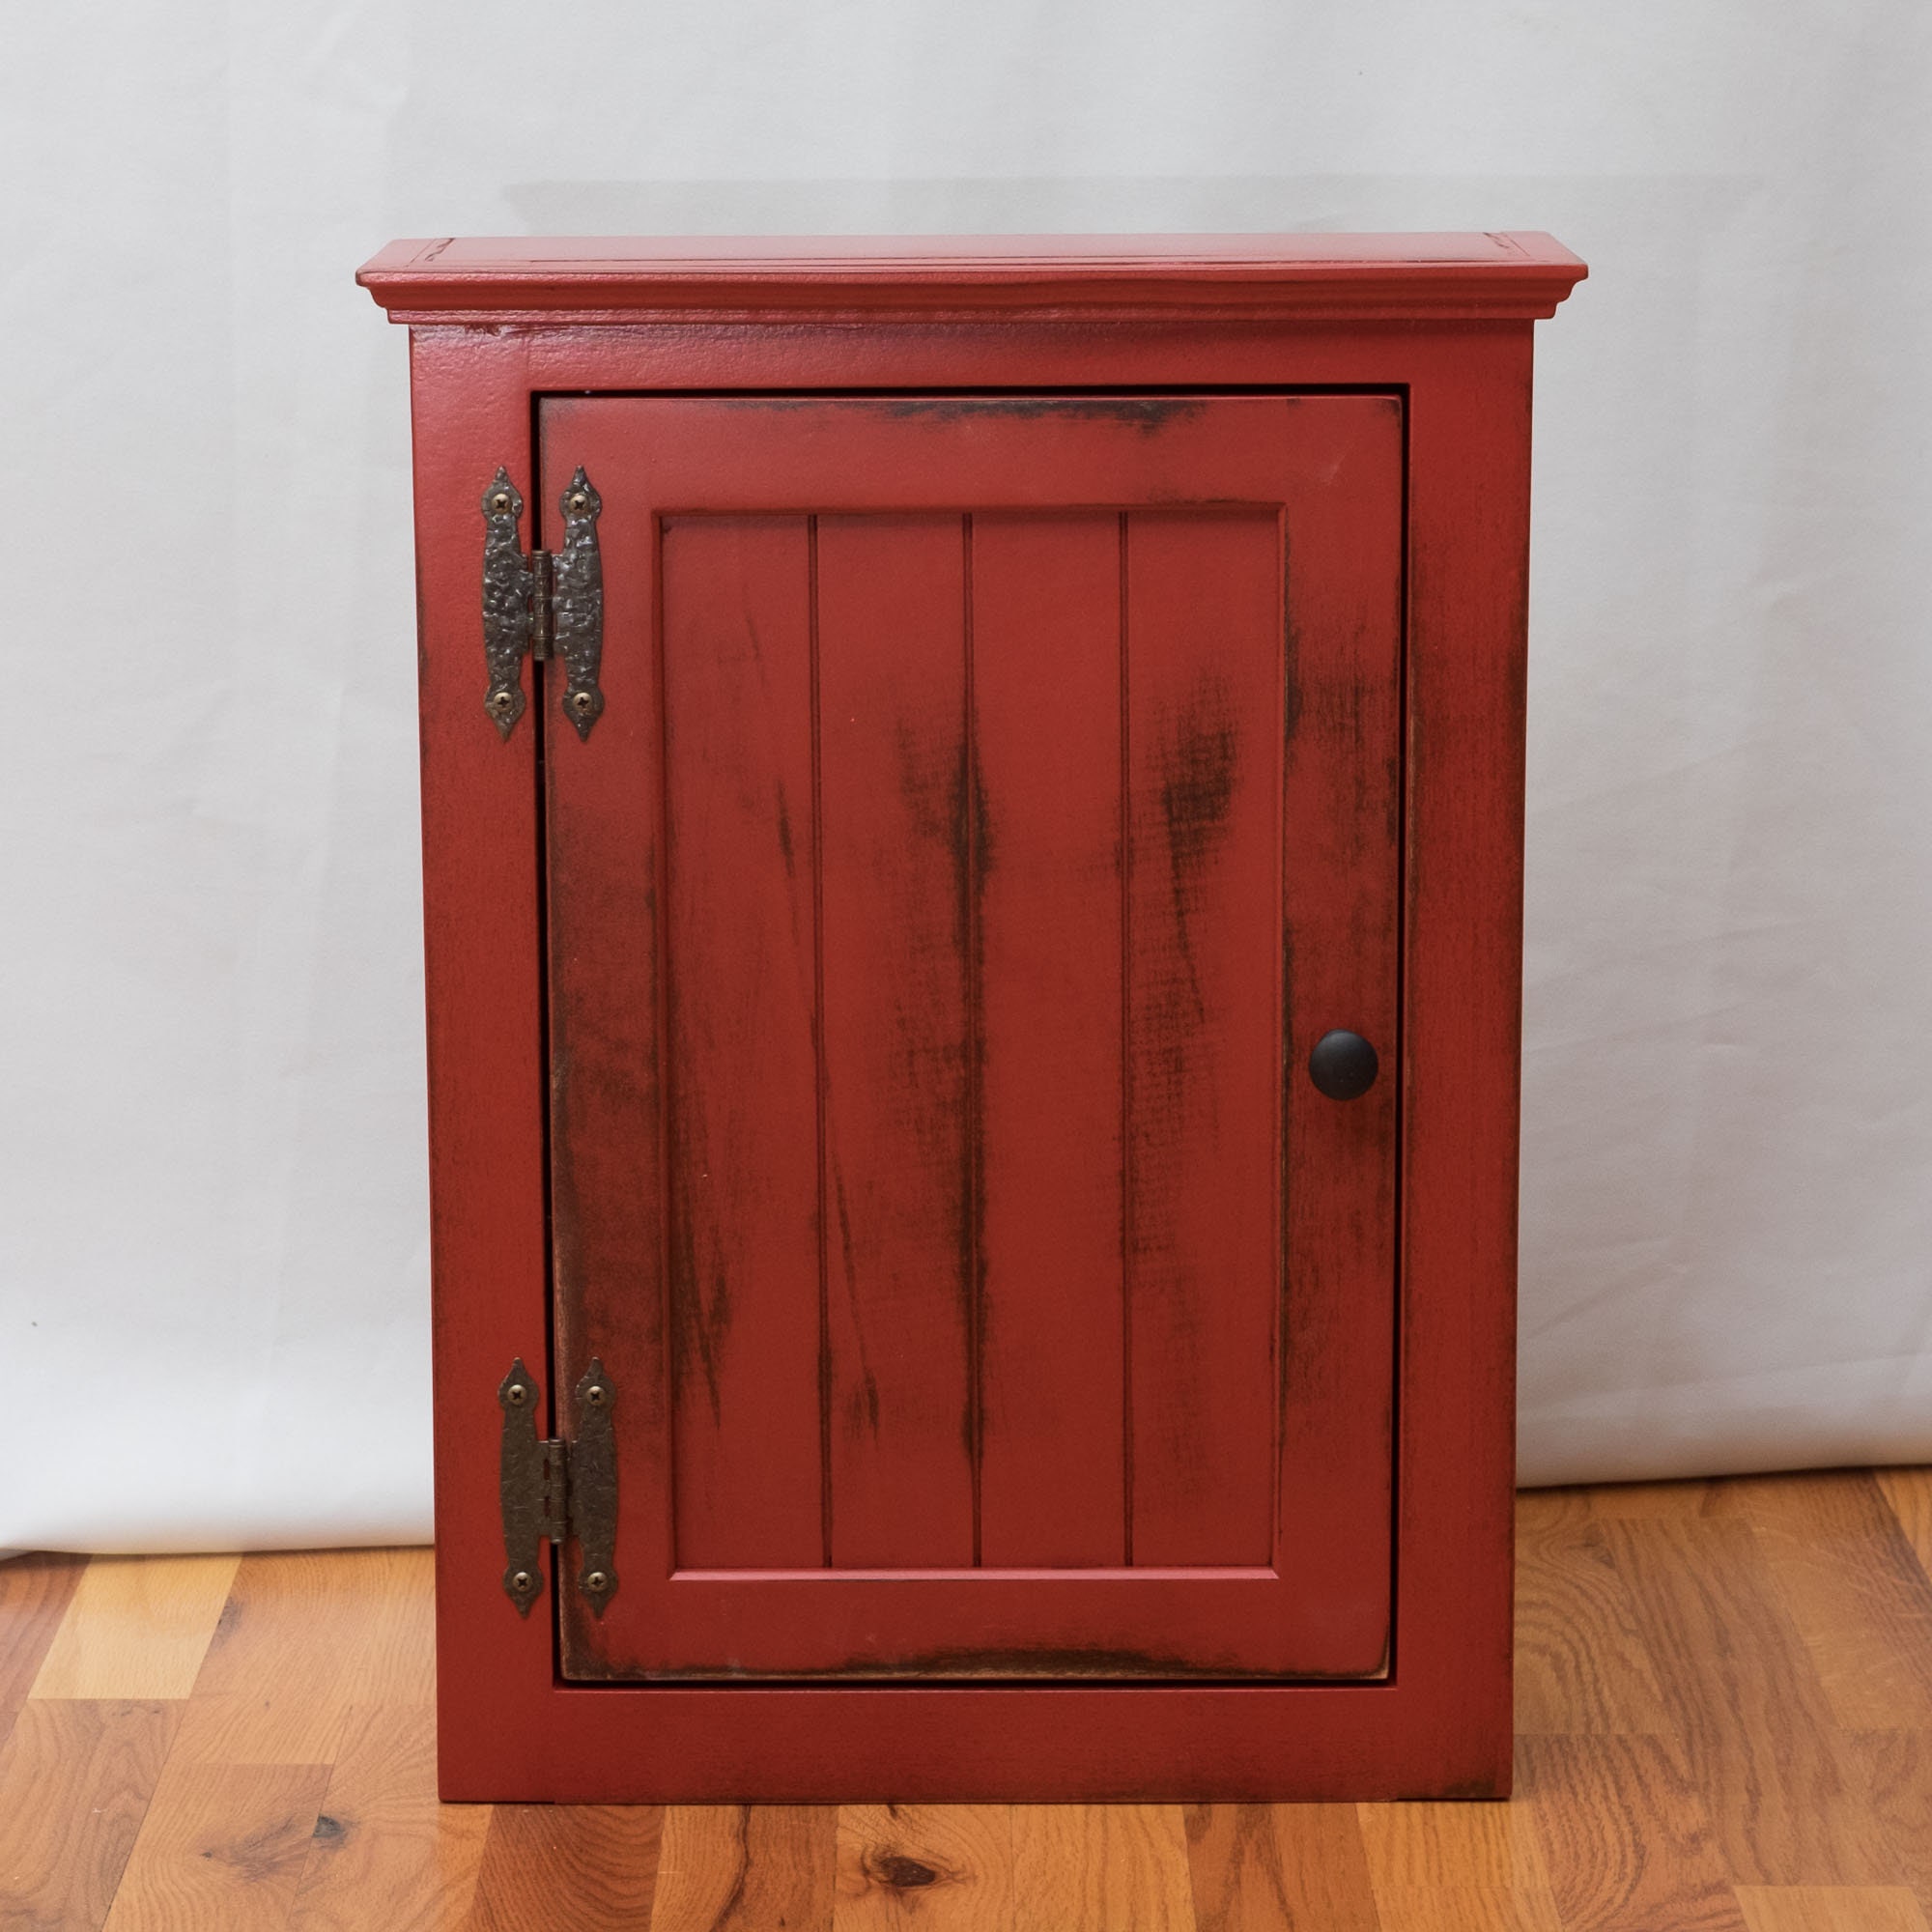 Red Painted Cupboard Handmade Wooden Wall Hanging Storage Cabinet Home  Decor